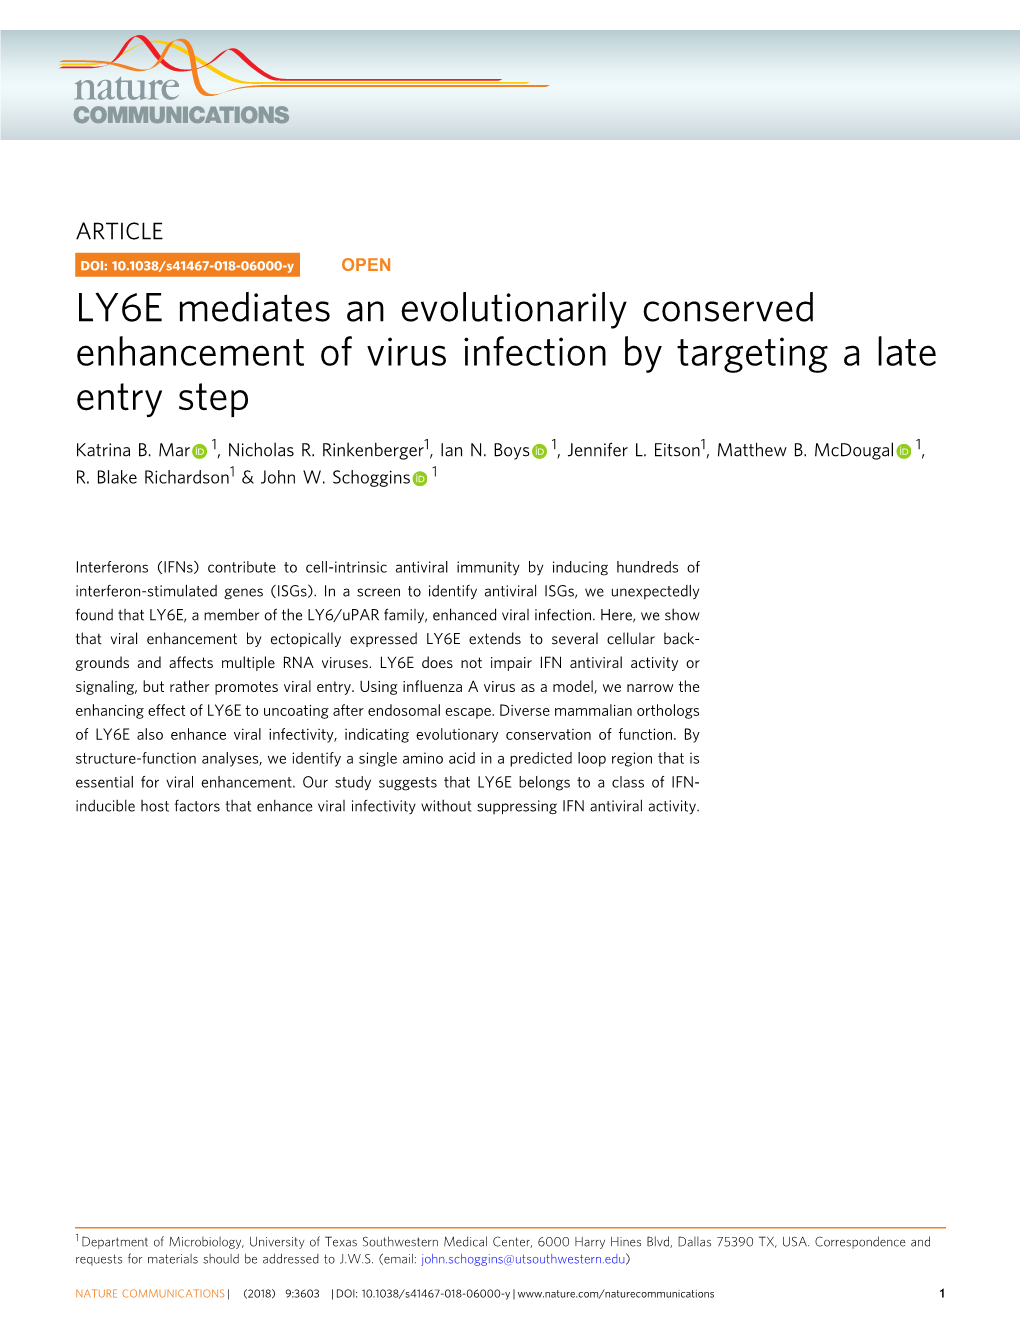 LY6E Mediates an Evolutionarily Conserved Enhancement of Virus Infection by Targeting a Late Entry Step